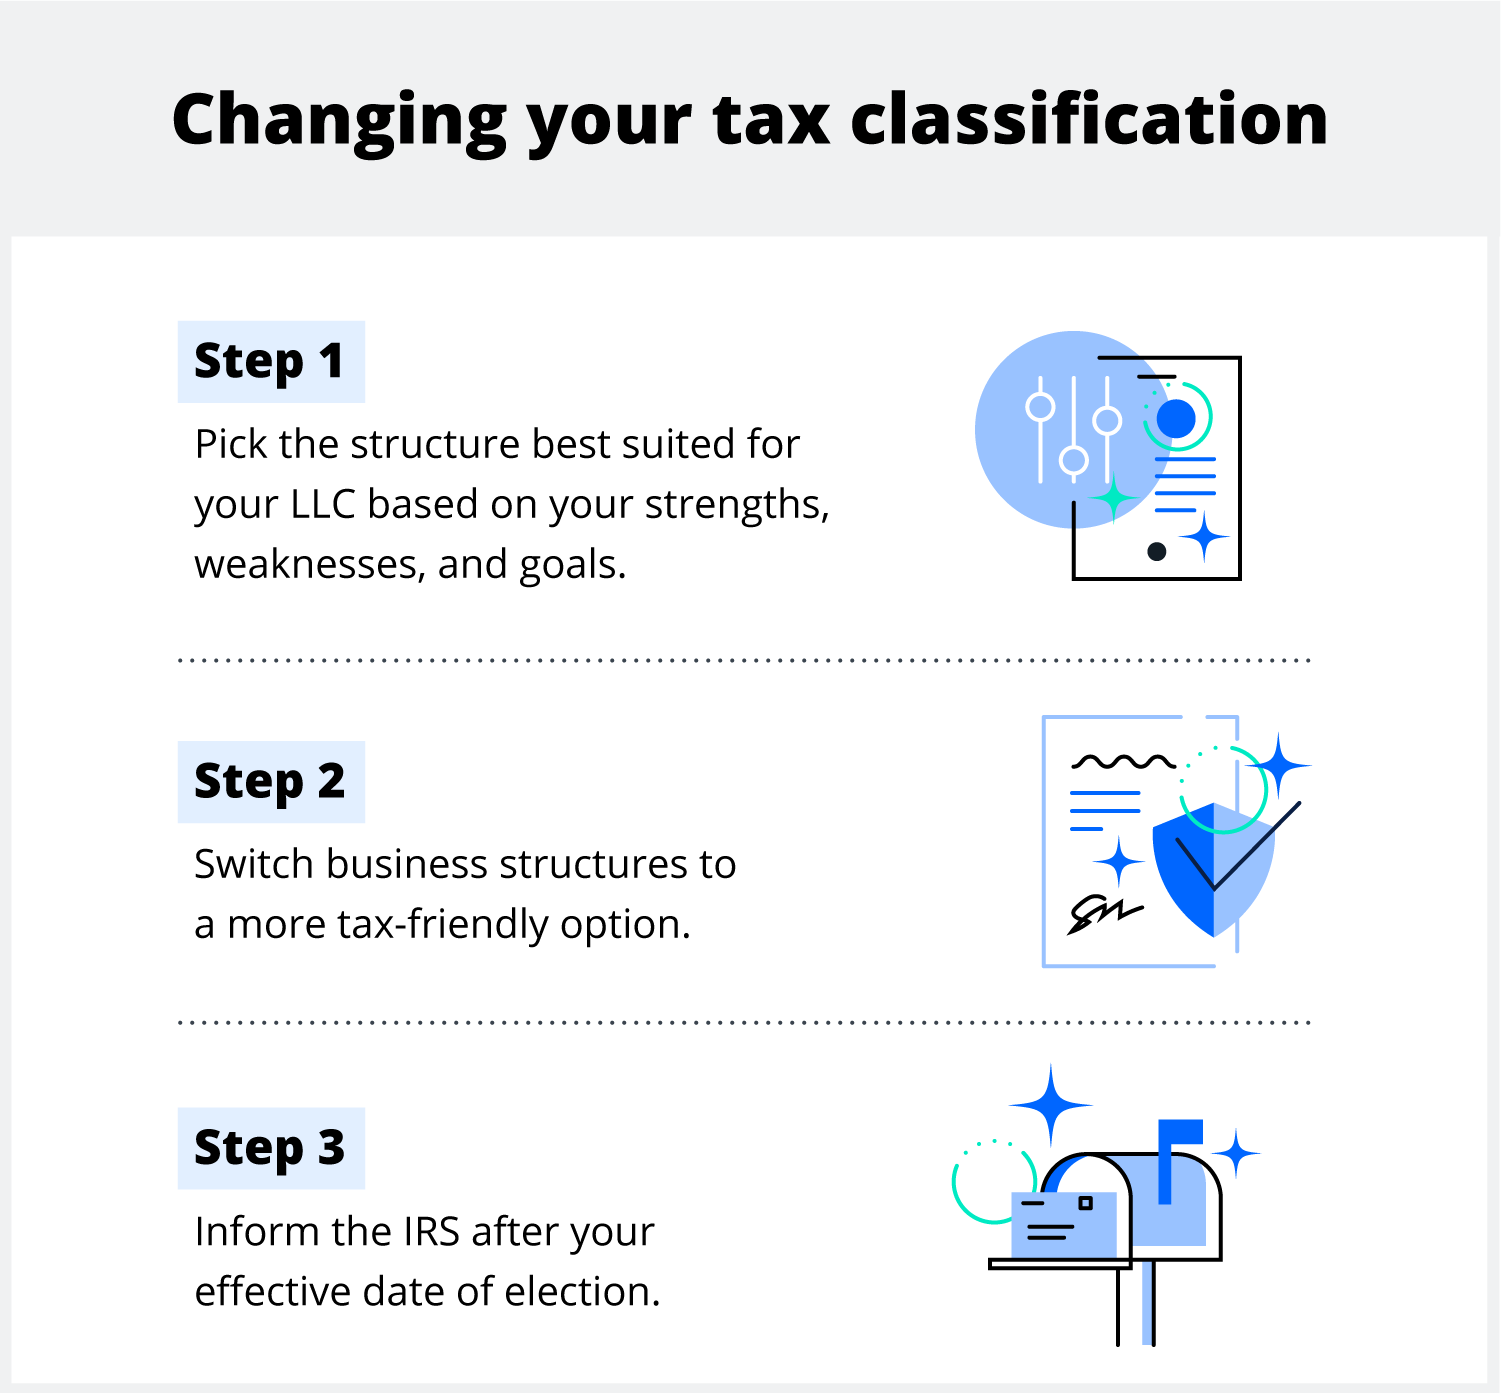 Changing your tax classification. Step 1: pick the business structure best suited for your LLC based on your strengths, weaknesses, and goals. Step 2: switch business structures to a more tax-friendly option. Step 3: Inform the IRS after your effective date of the election.